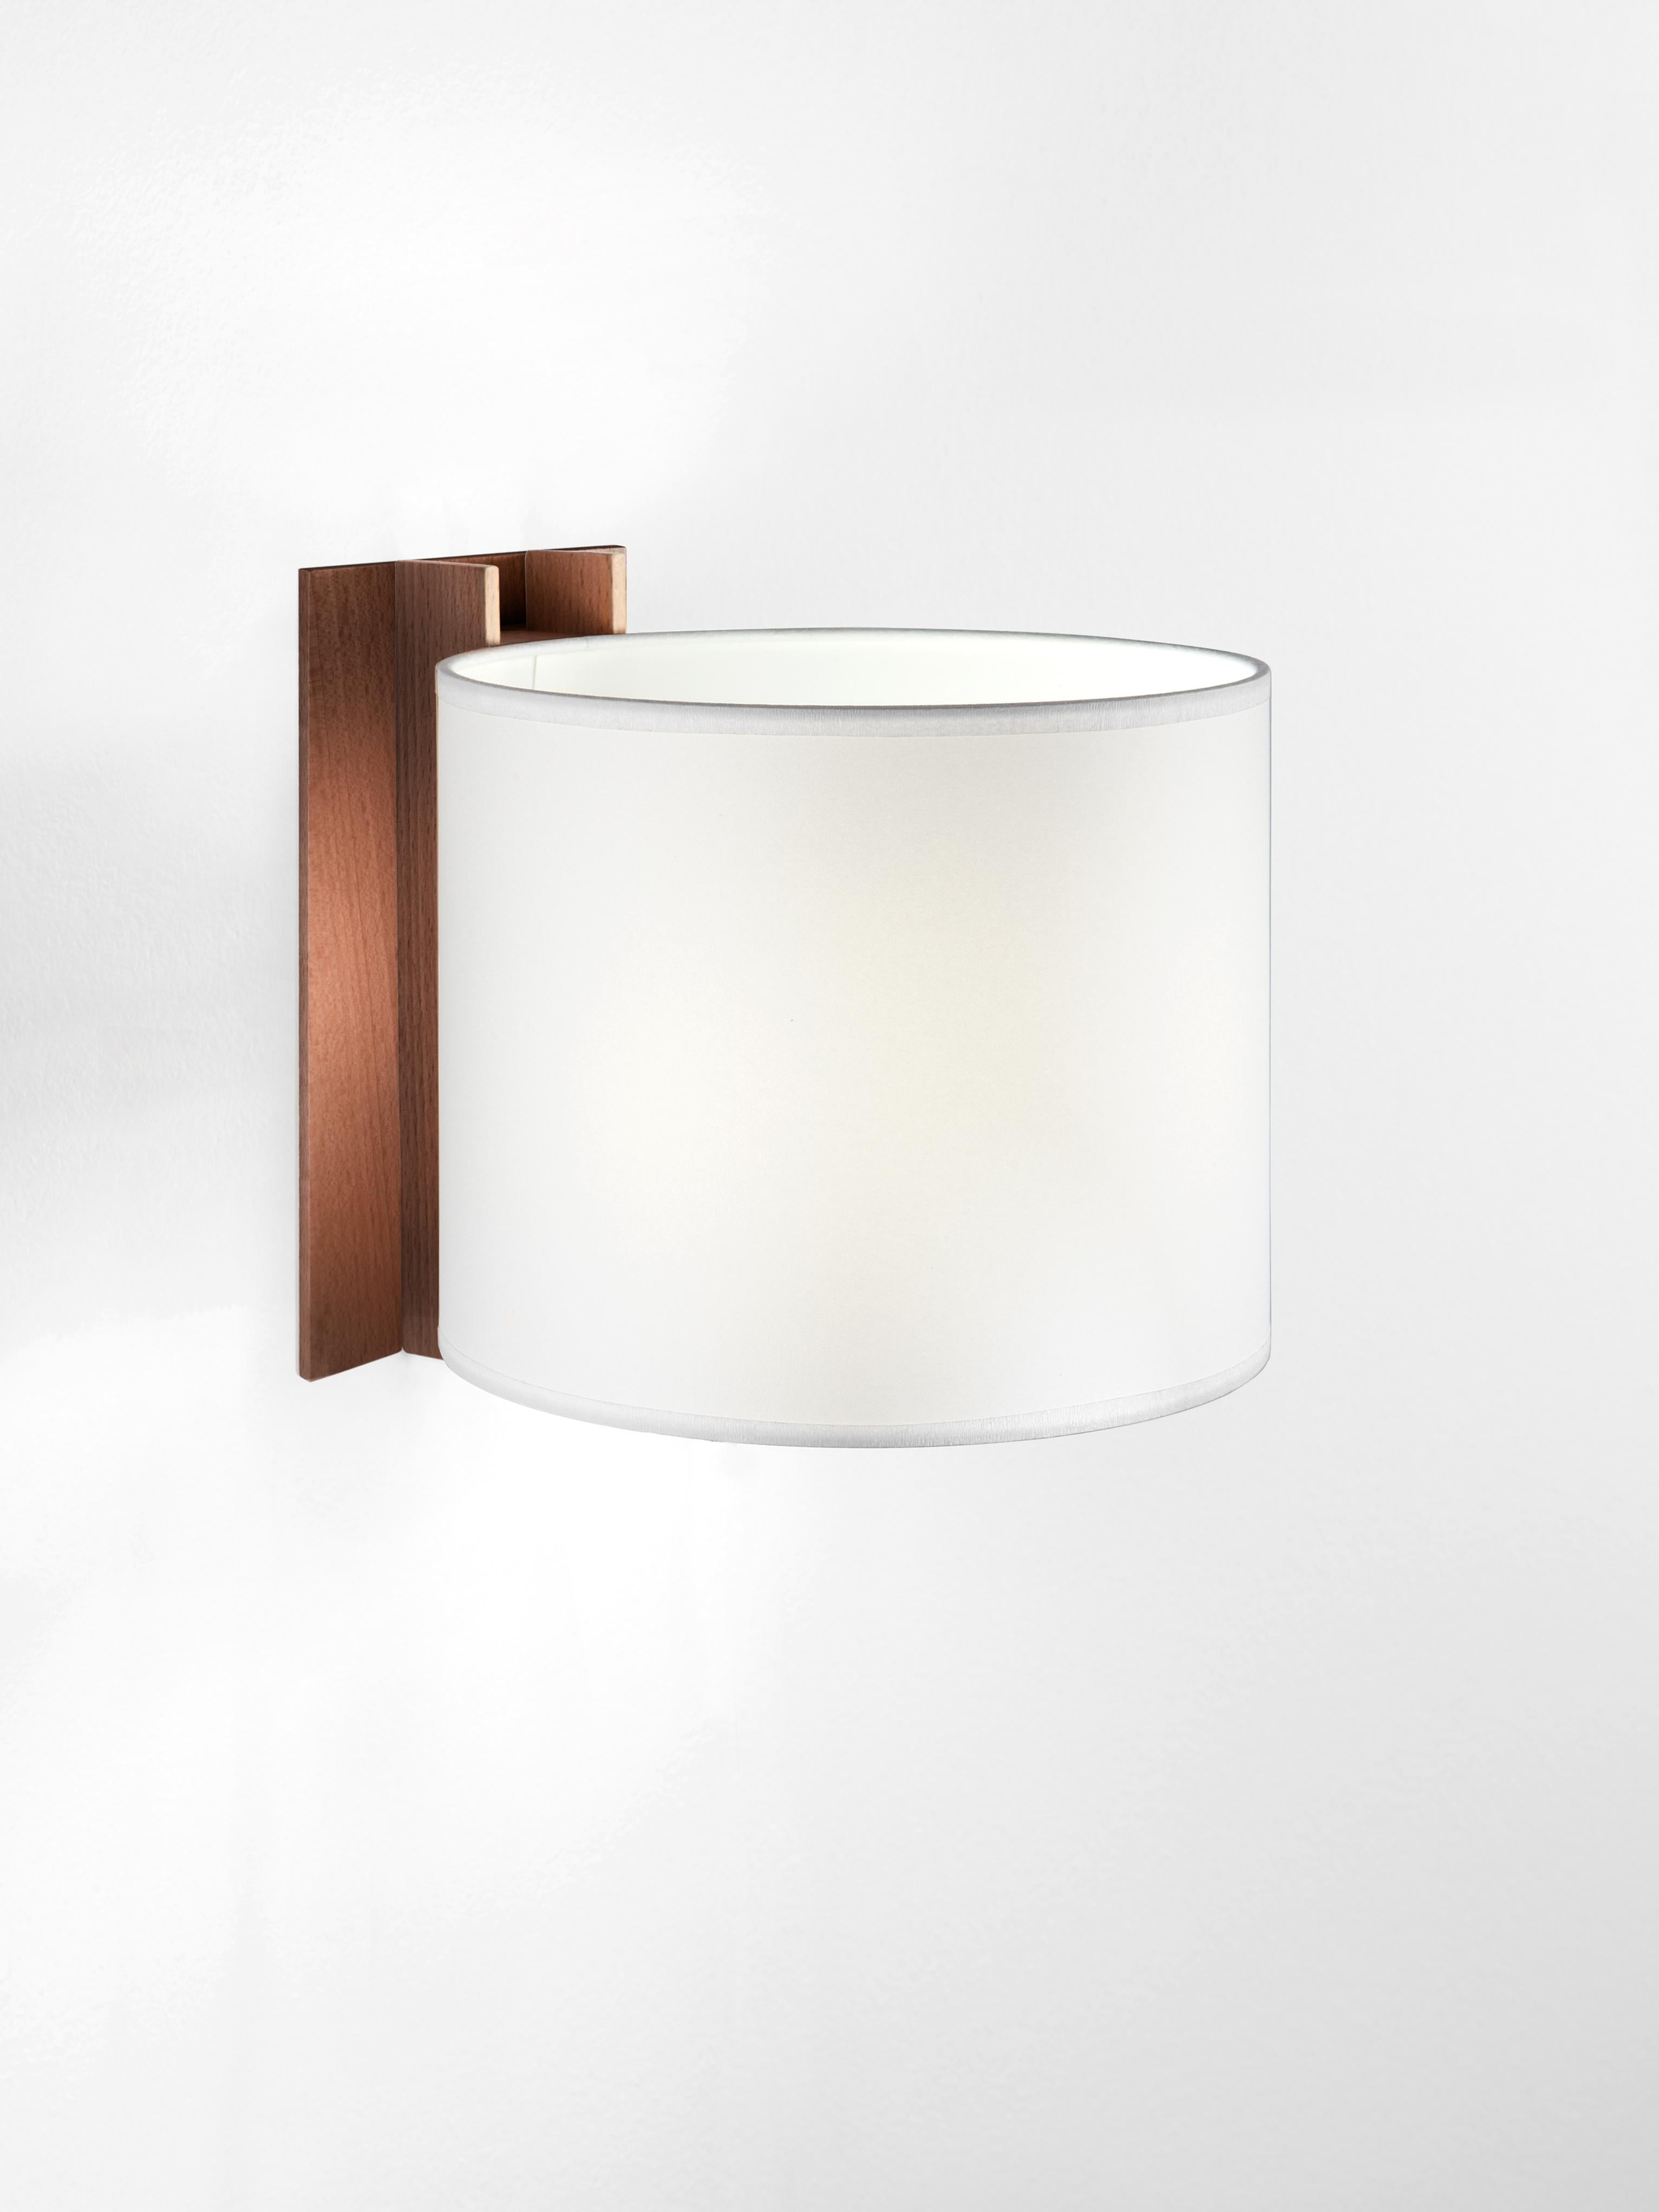 White and walnut TMM corto wall lamp by Miguel Milá
Dimensions: D 20 x W 23 x H 20 cm
Materials: Metal, walnut wood, parchment lampshade.
Direct wall.
Available in beech or walnut and in white or beige lampshade.
Available with plug or direct